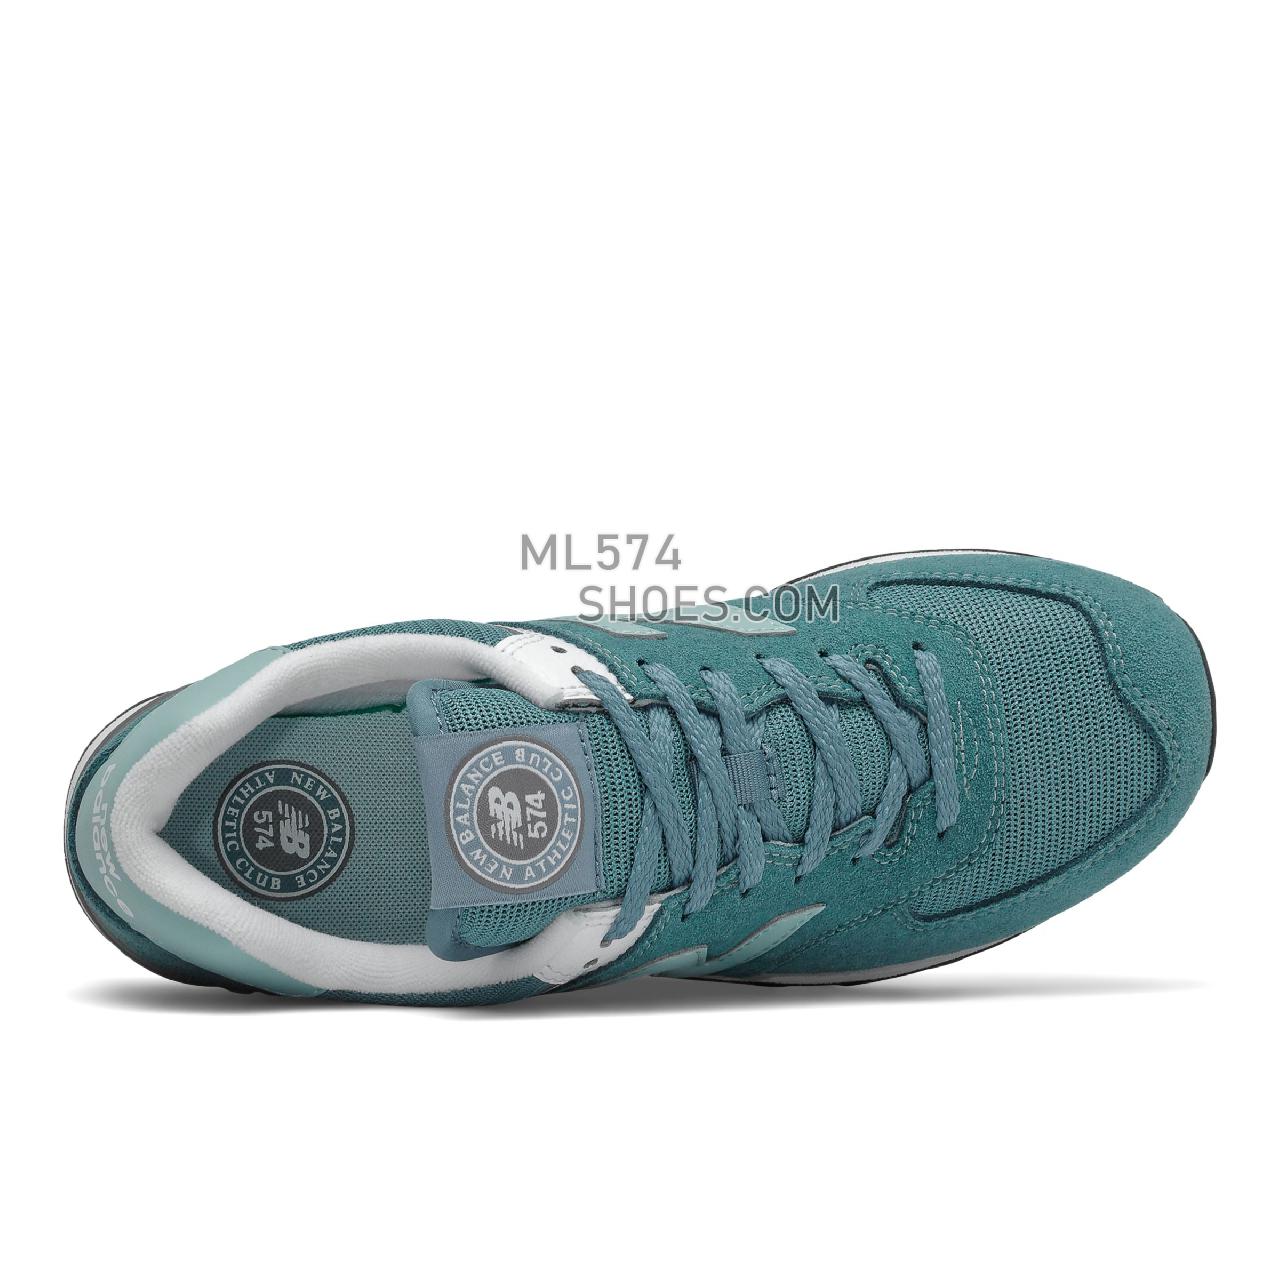 New Balance 574 - Women's Classic Sneakers - Deep Sea with Storm Blue - WL574HC2